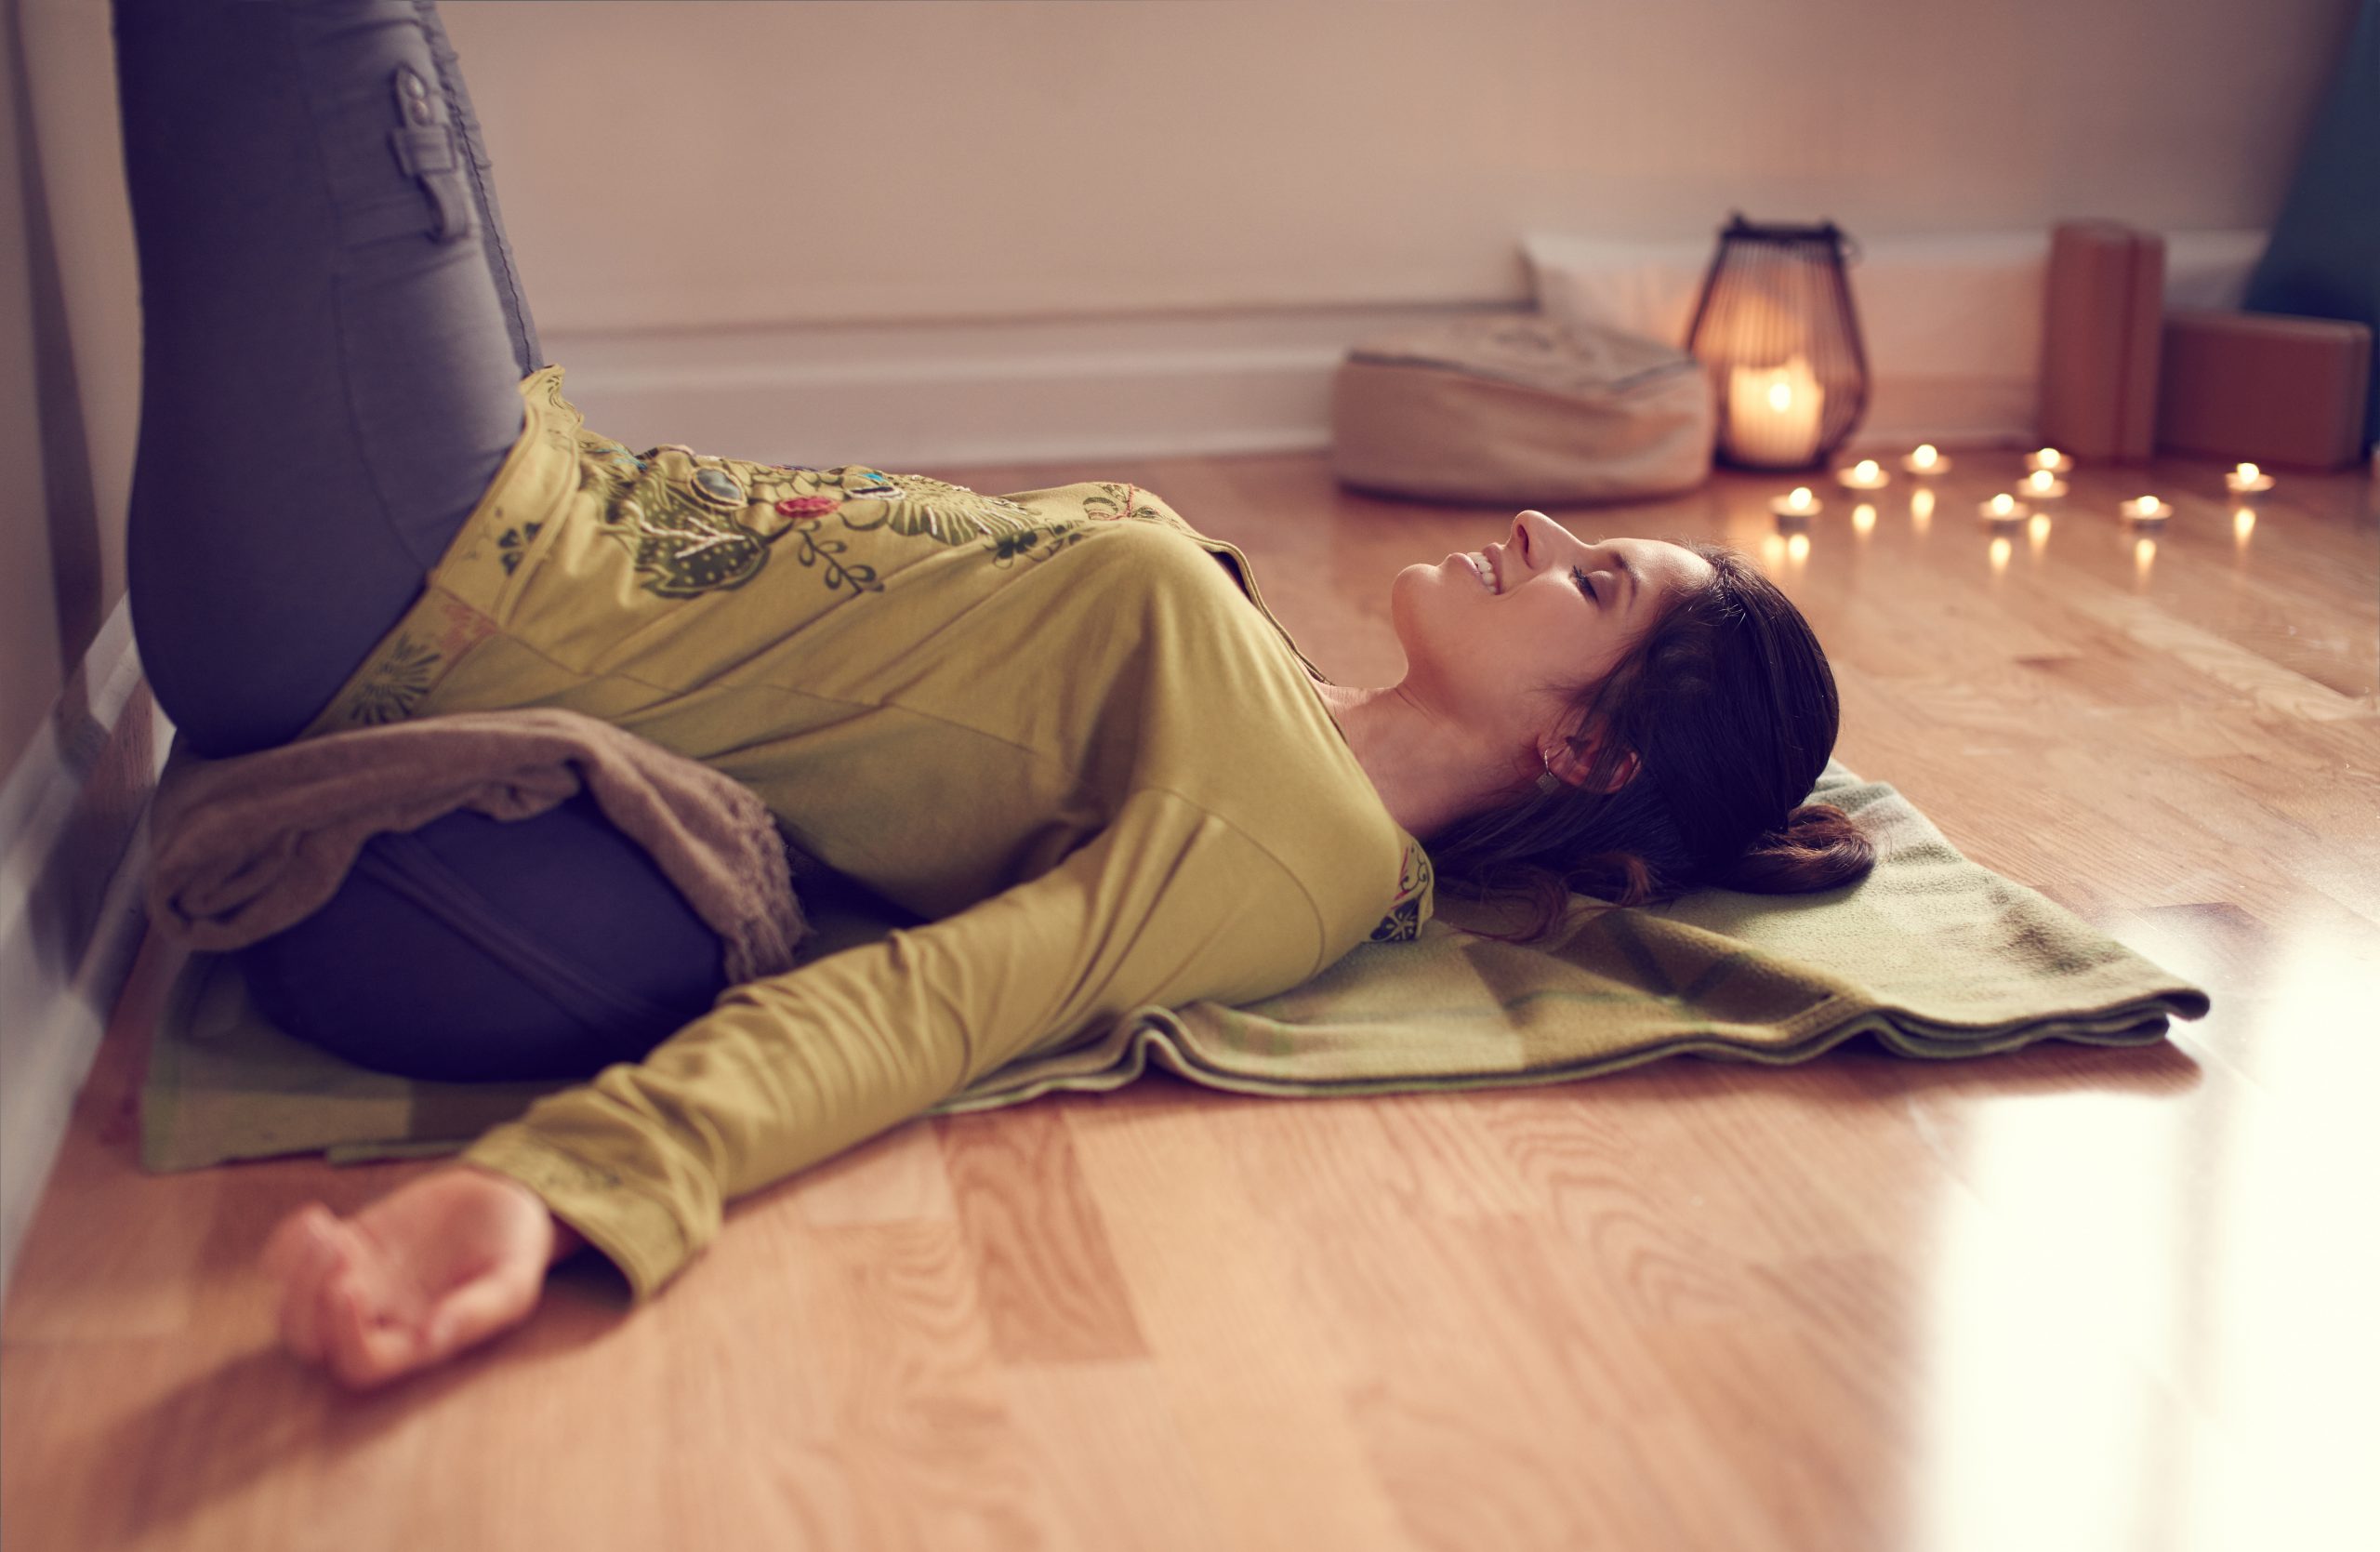 Ab April: Therapeutisches Yin Yoga Online